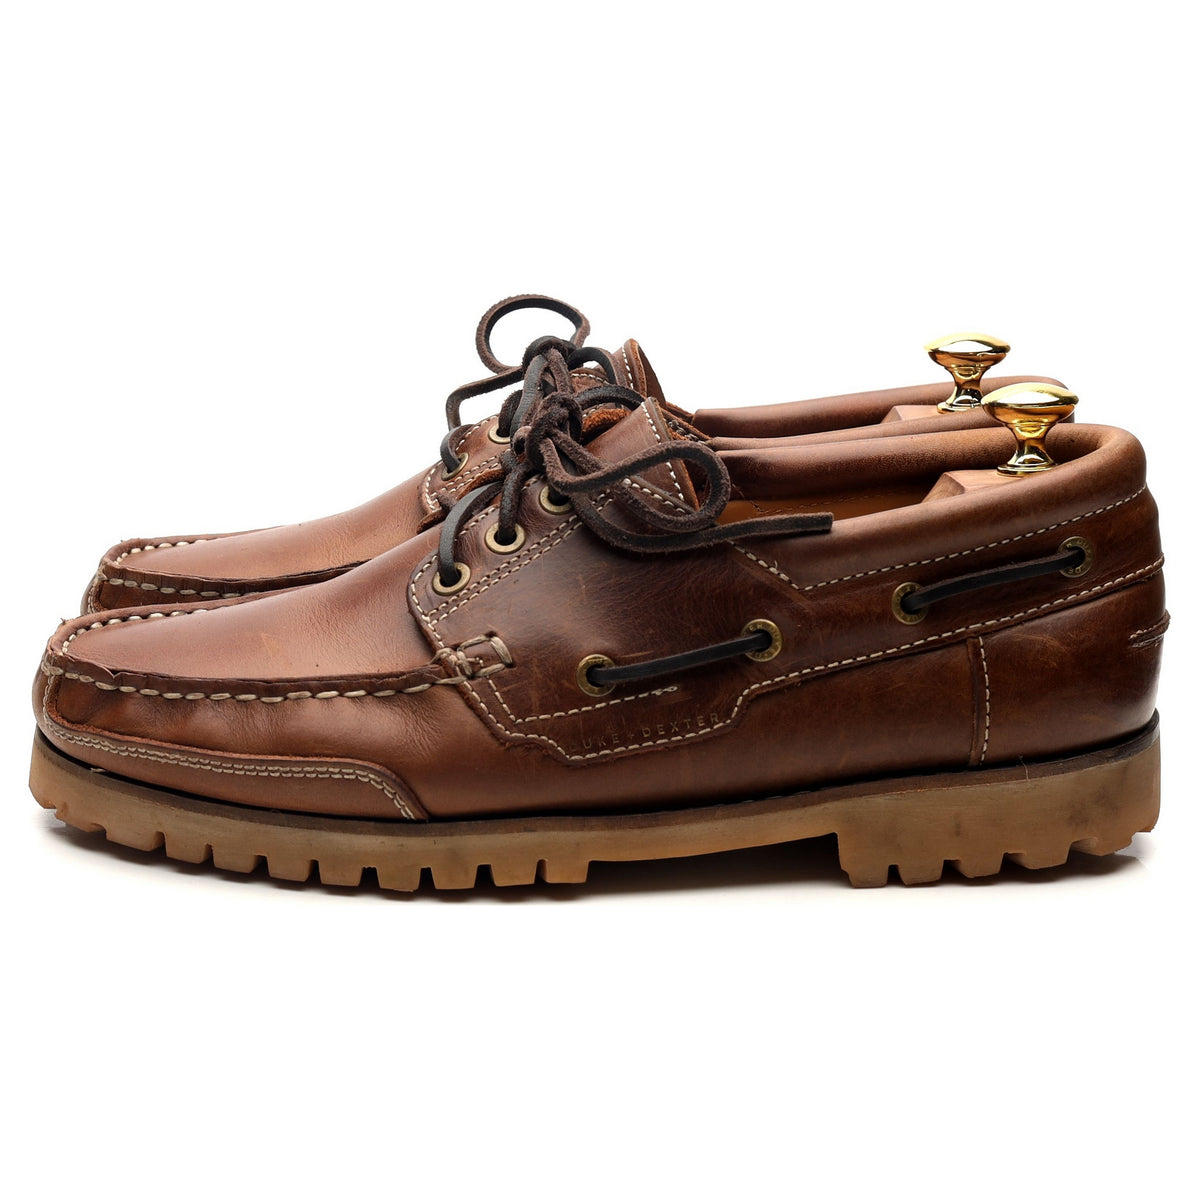 Brown Leather Boat Shoes UK 8 EU 42